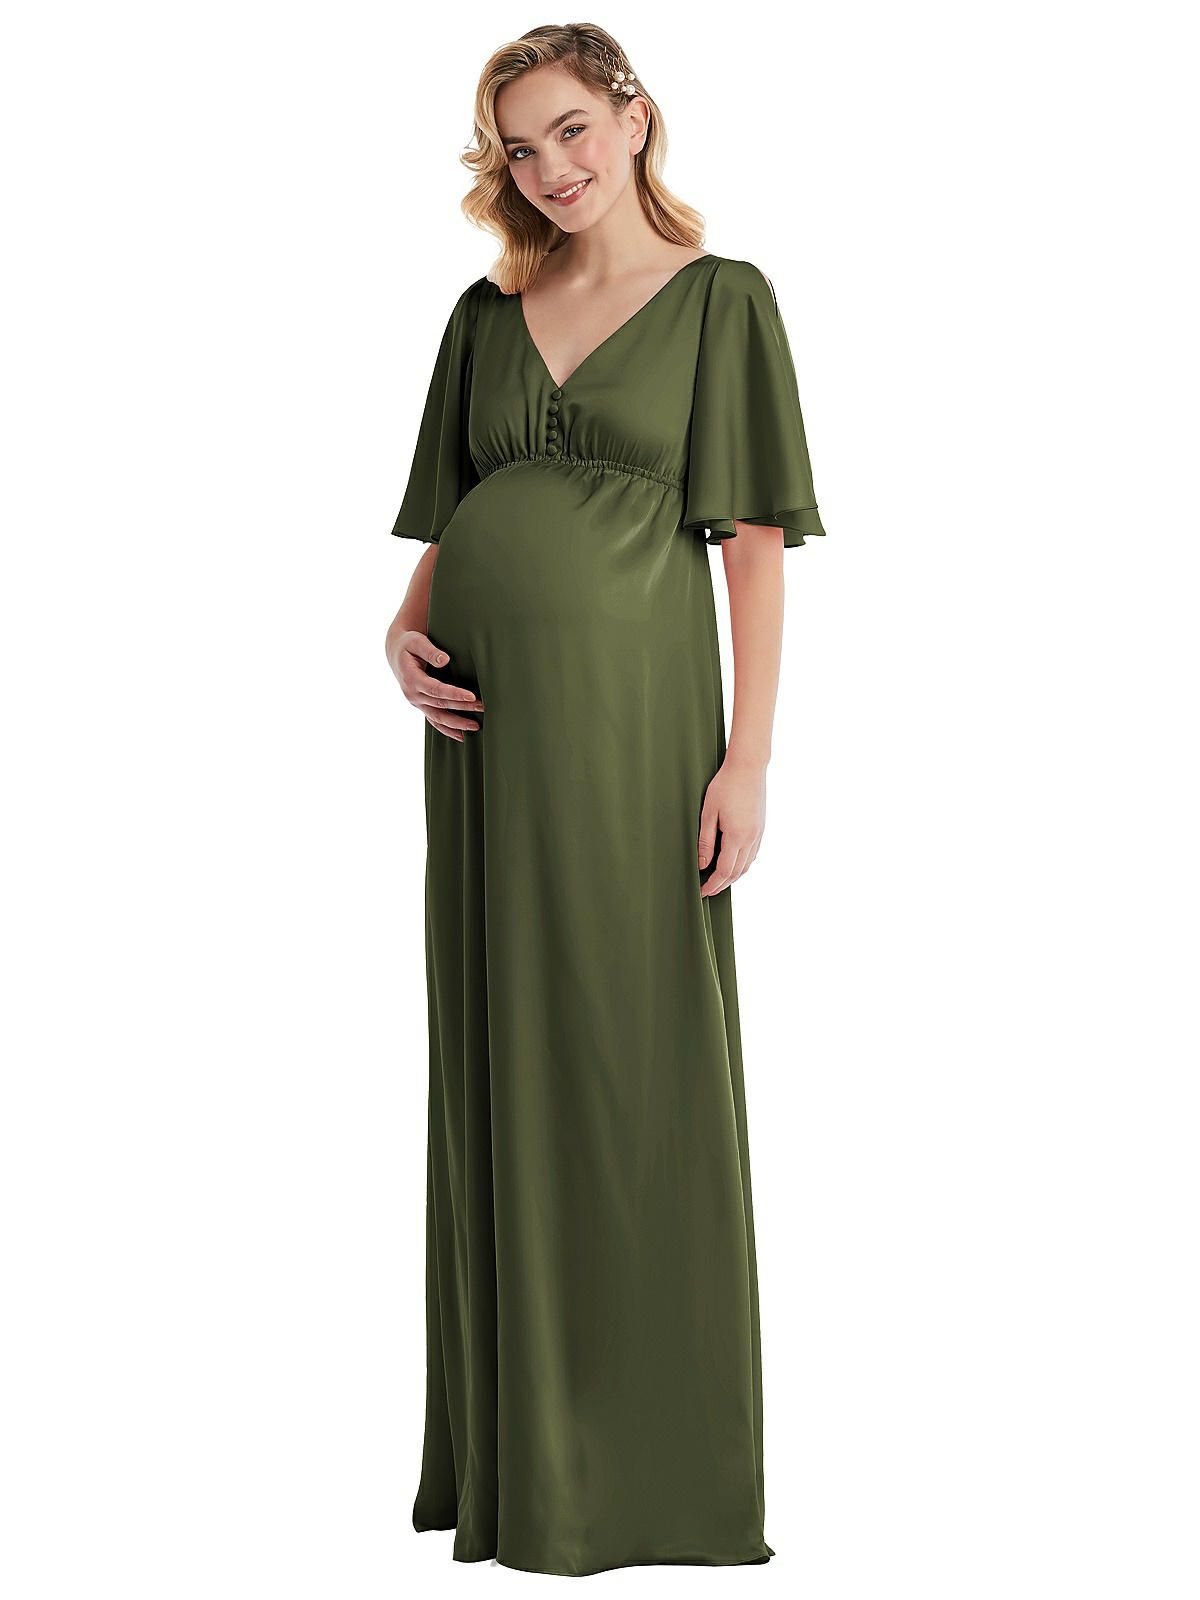 Flutter Bell Sleeve Empire Maternity Dress in Olive Green | The Dessy Group